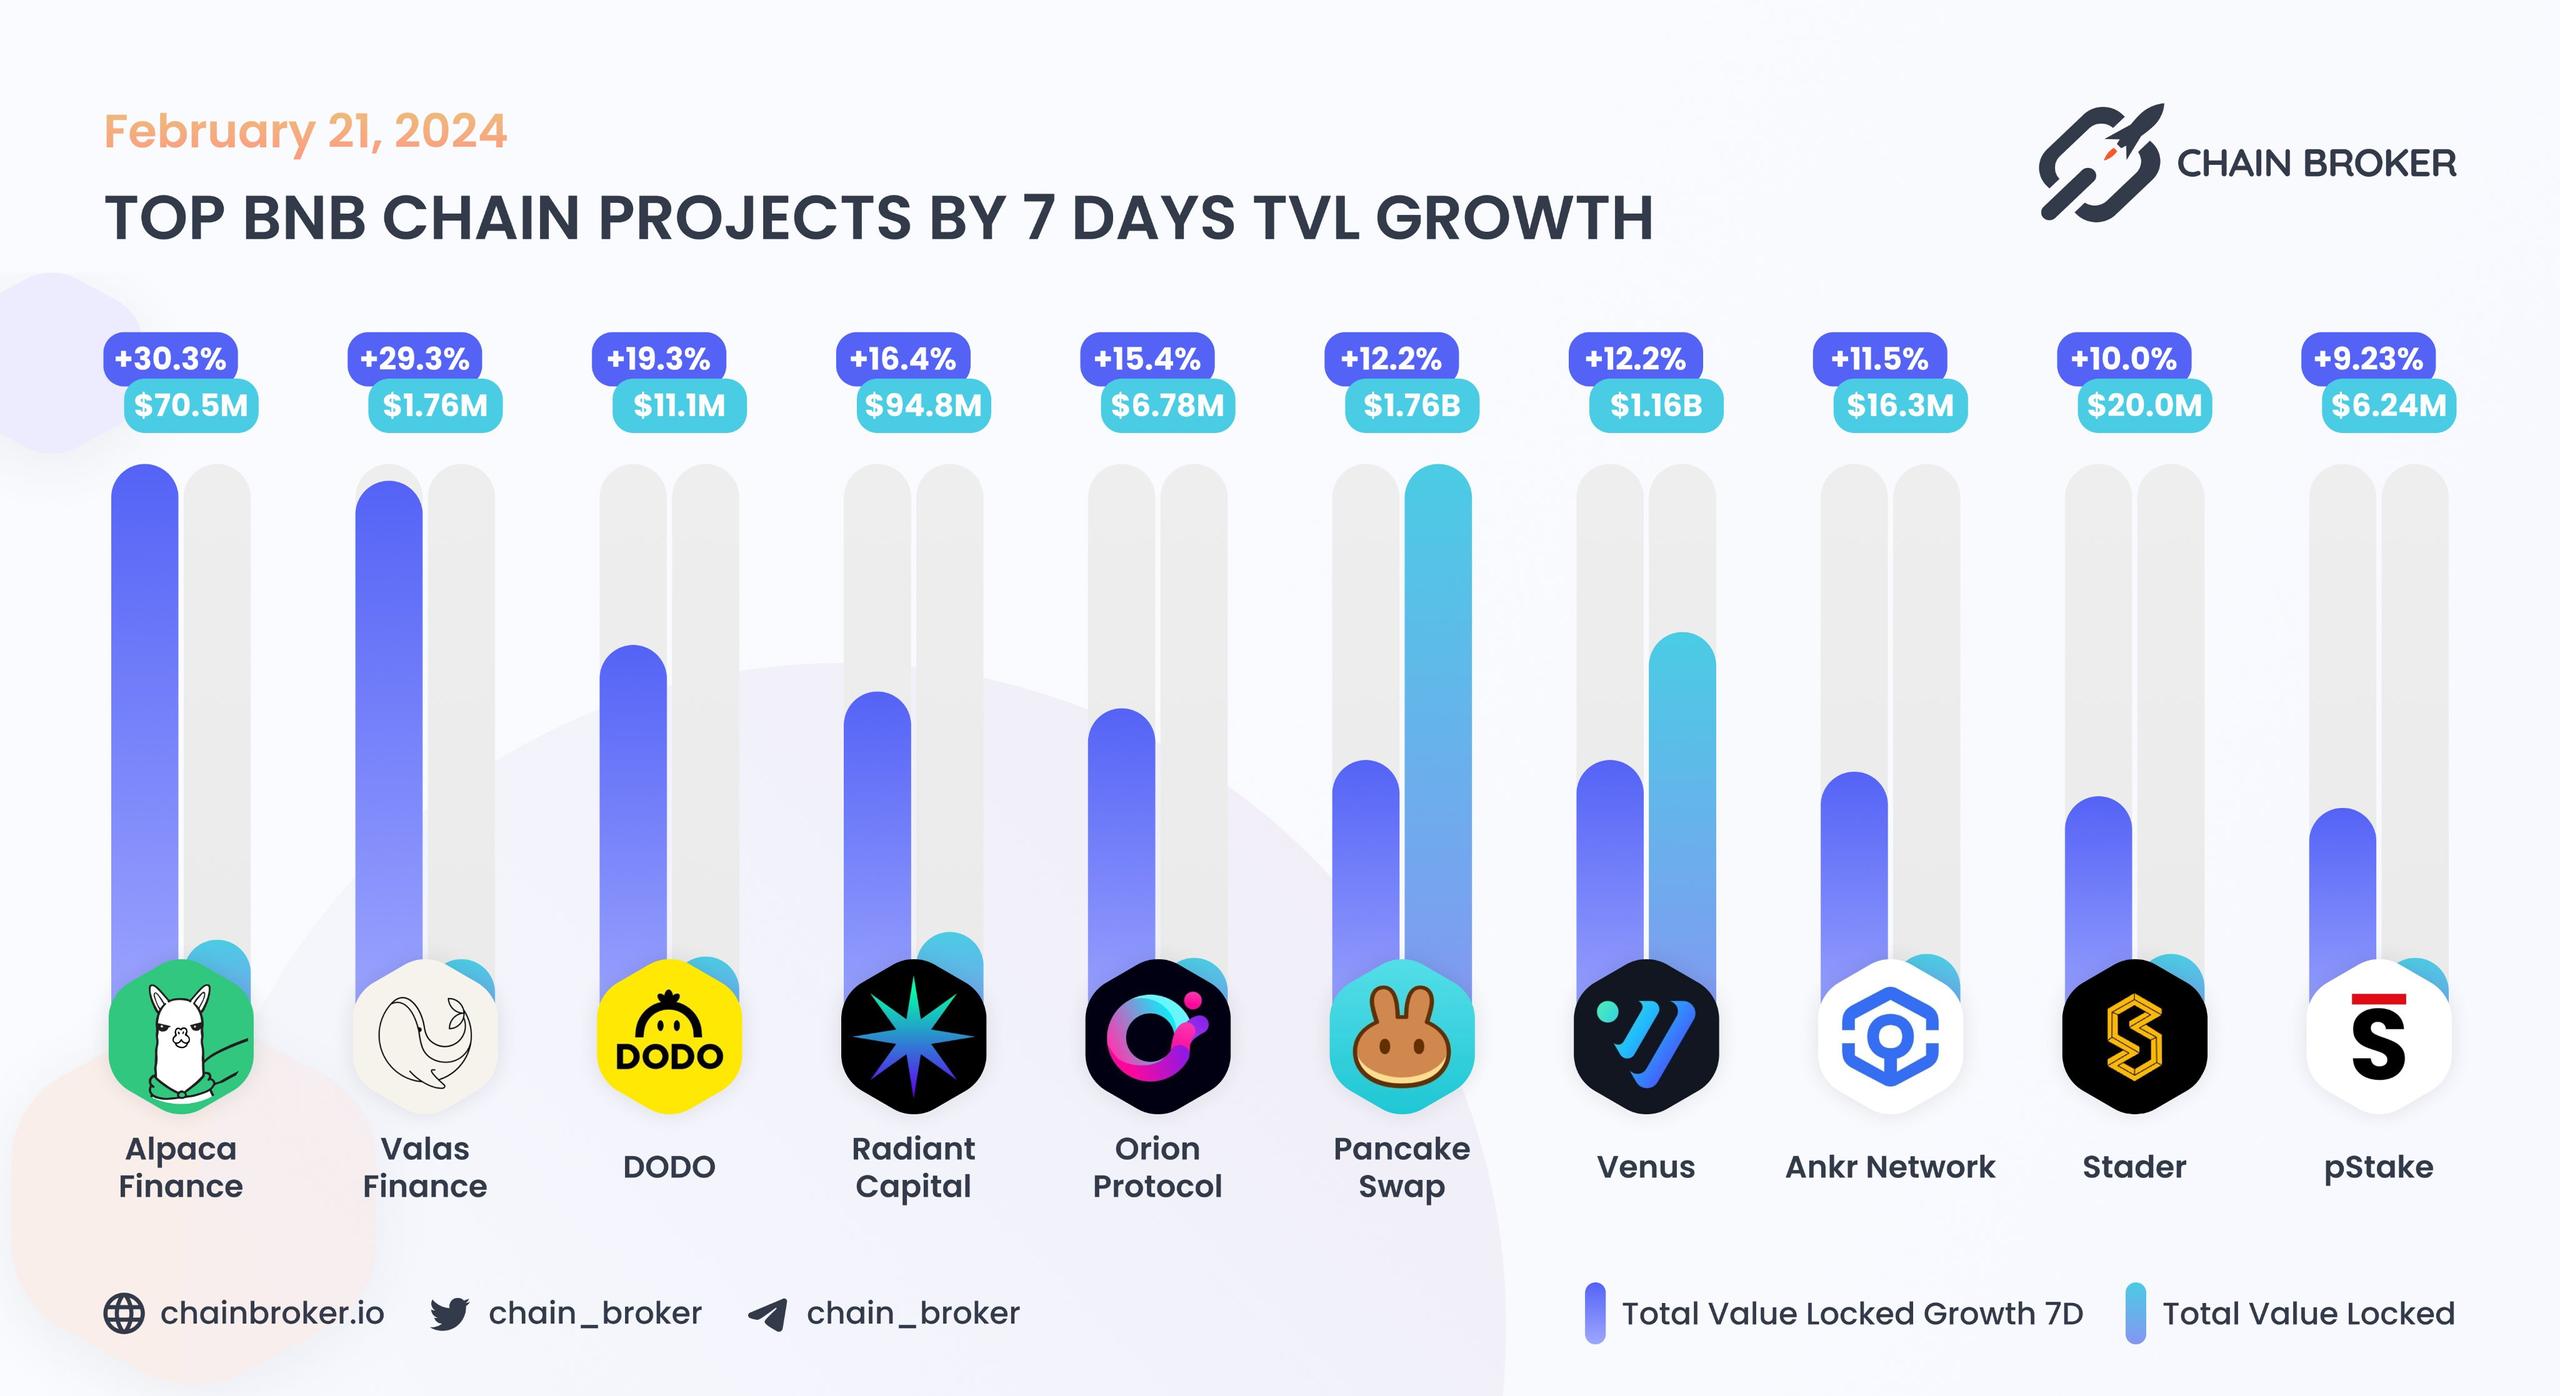 Top BNB Chain projects ranged by 7D TVL growth